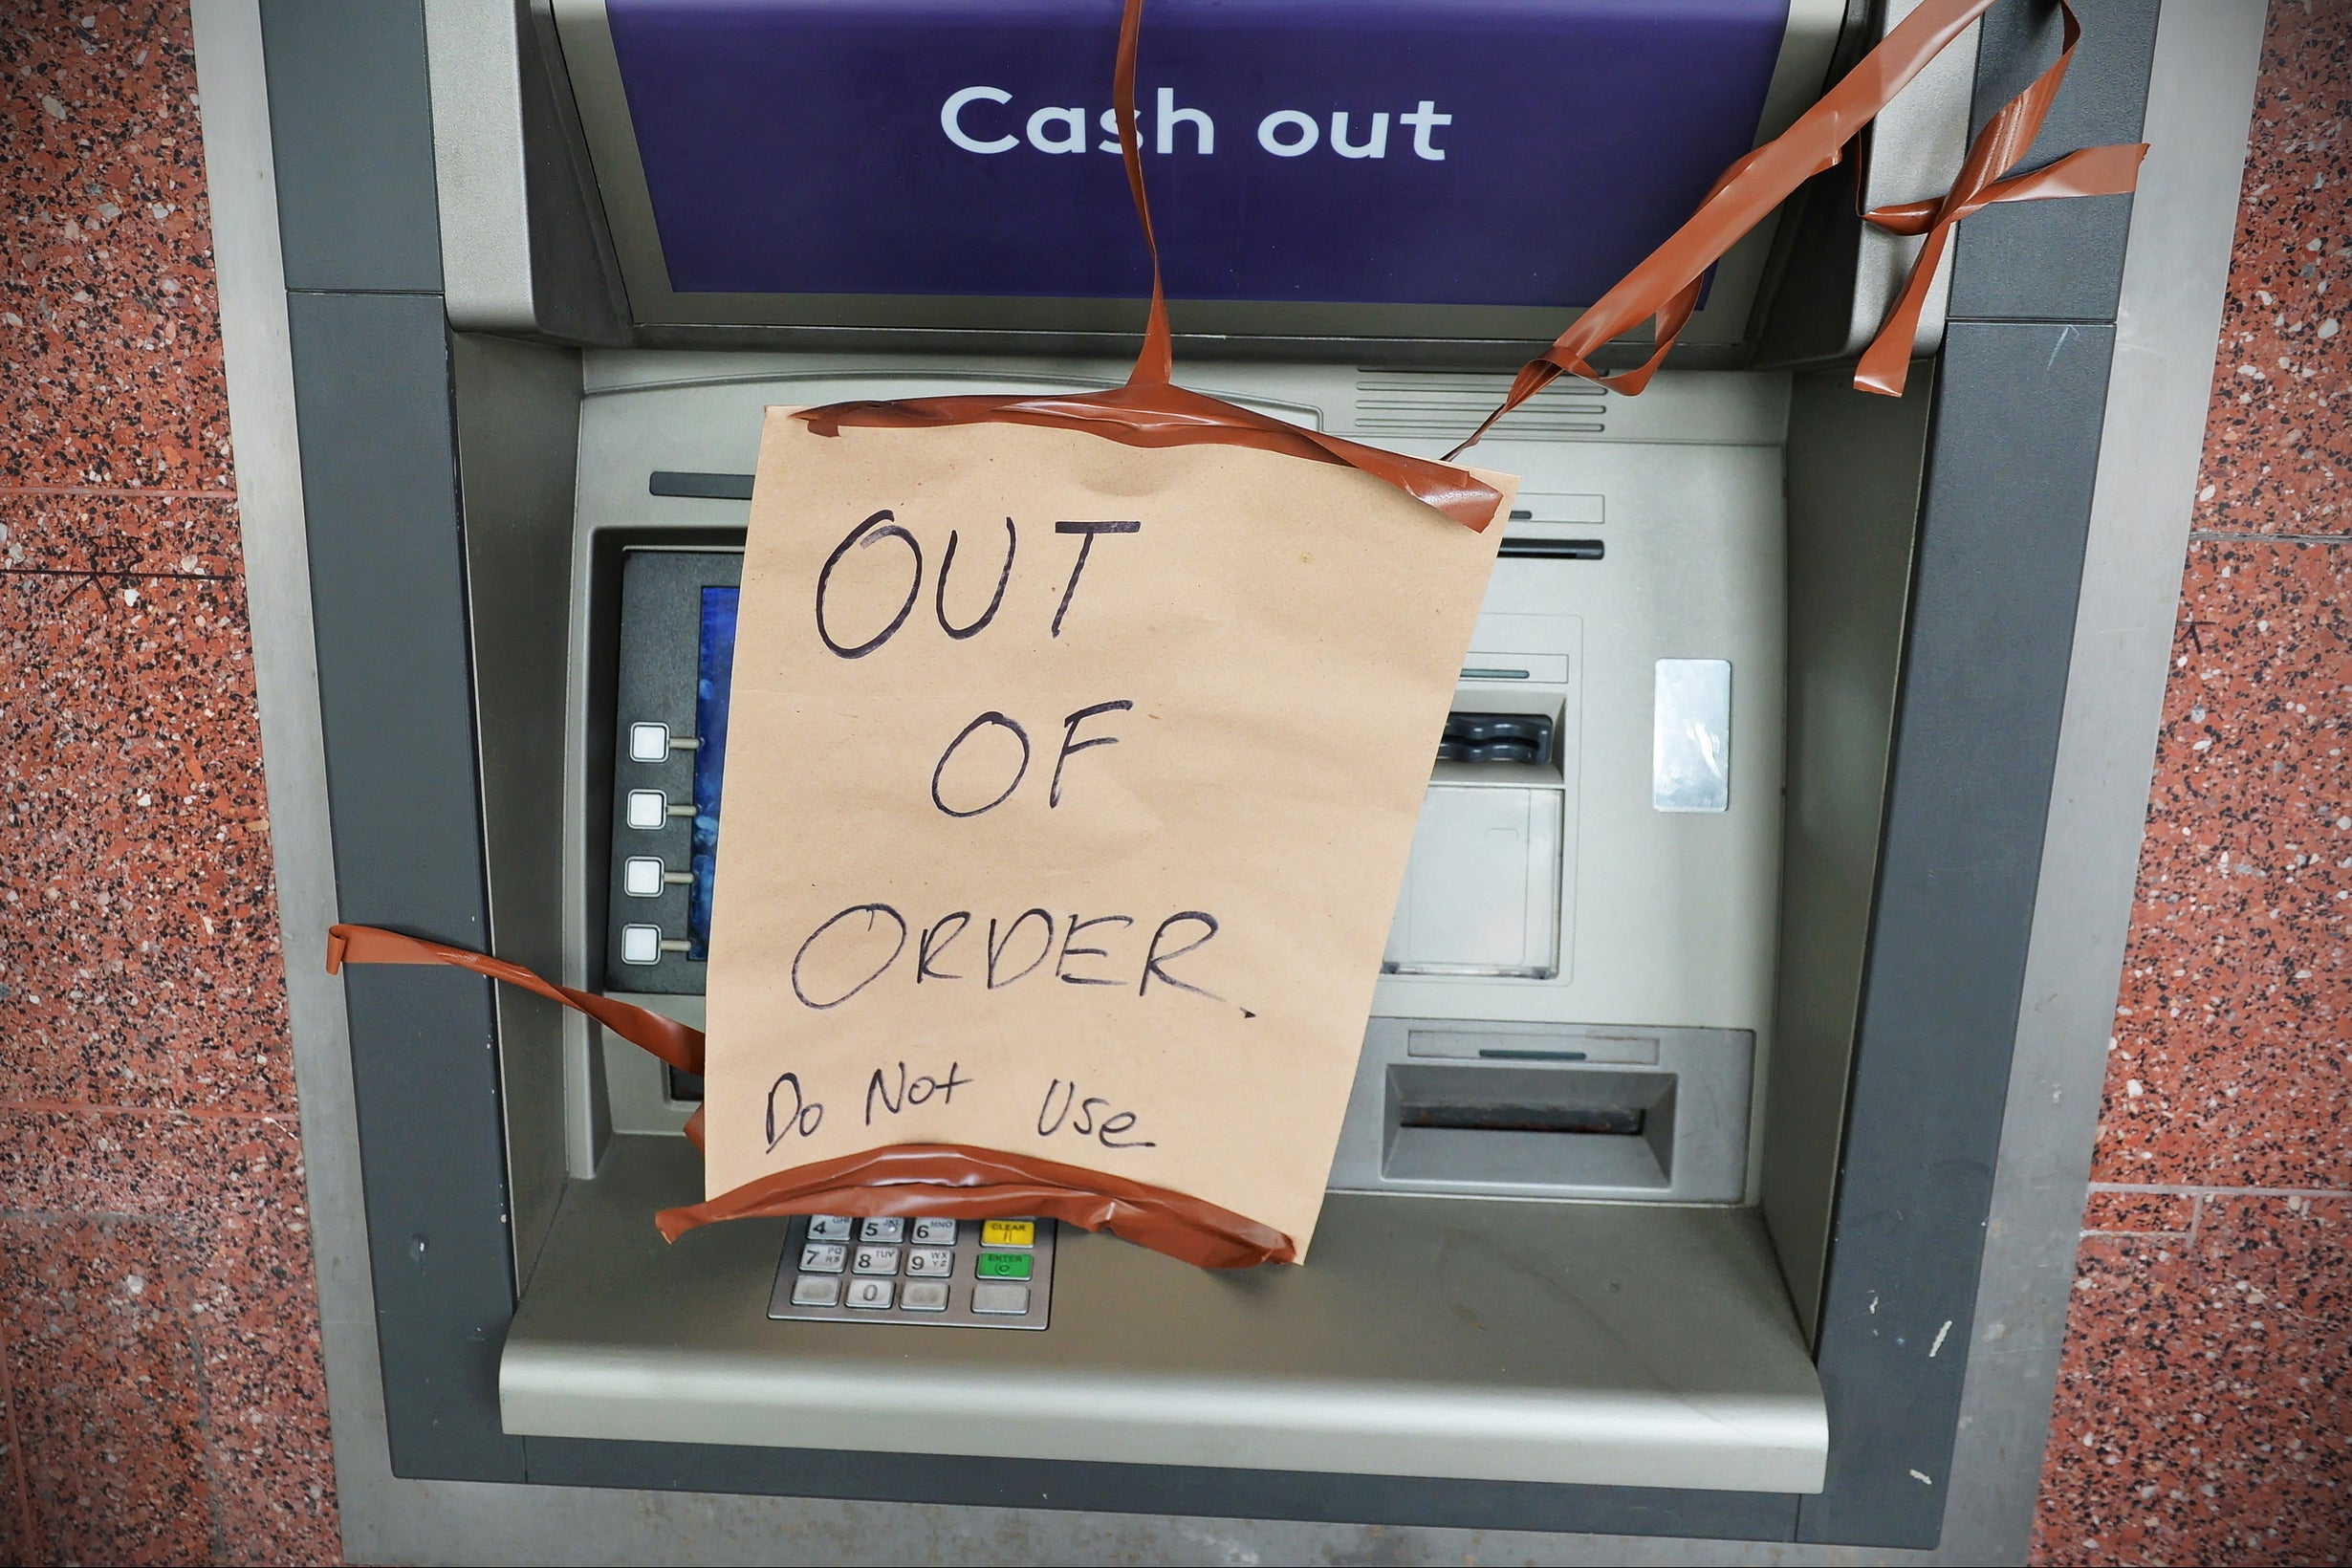 T me dump atm. Банкомат. Табличка out of order. ATM out of service. Sorry out of order.